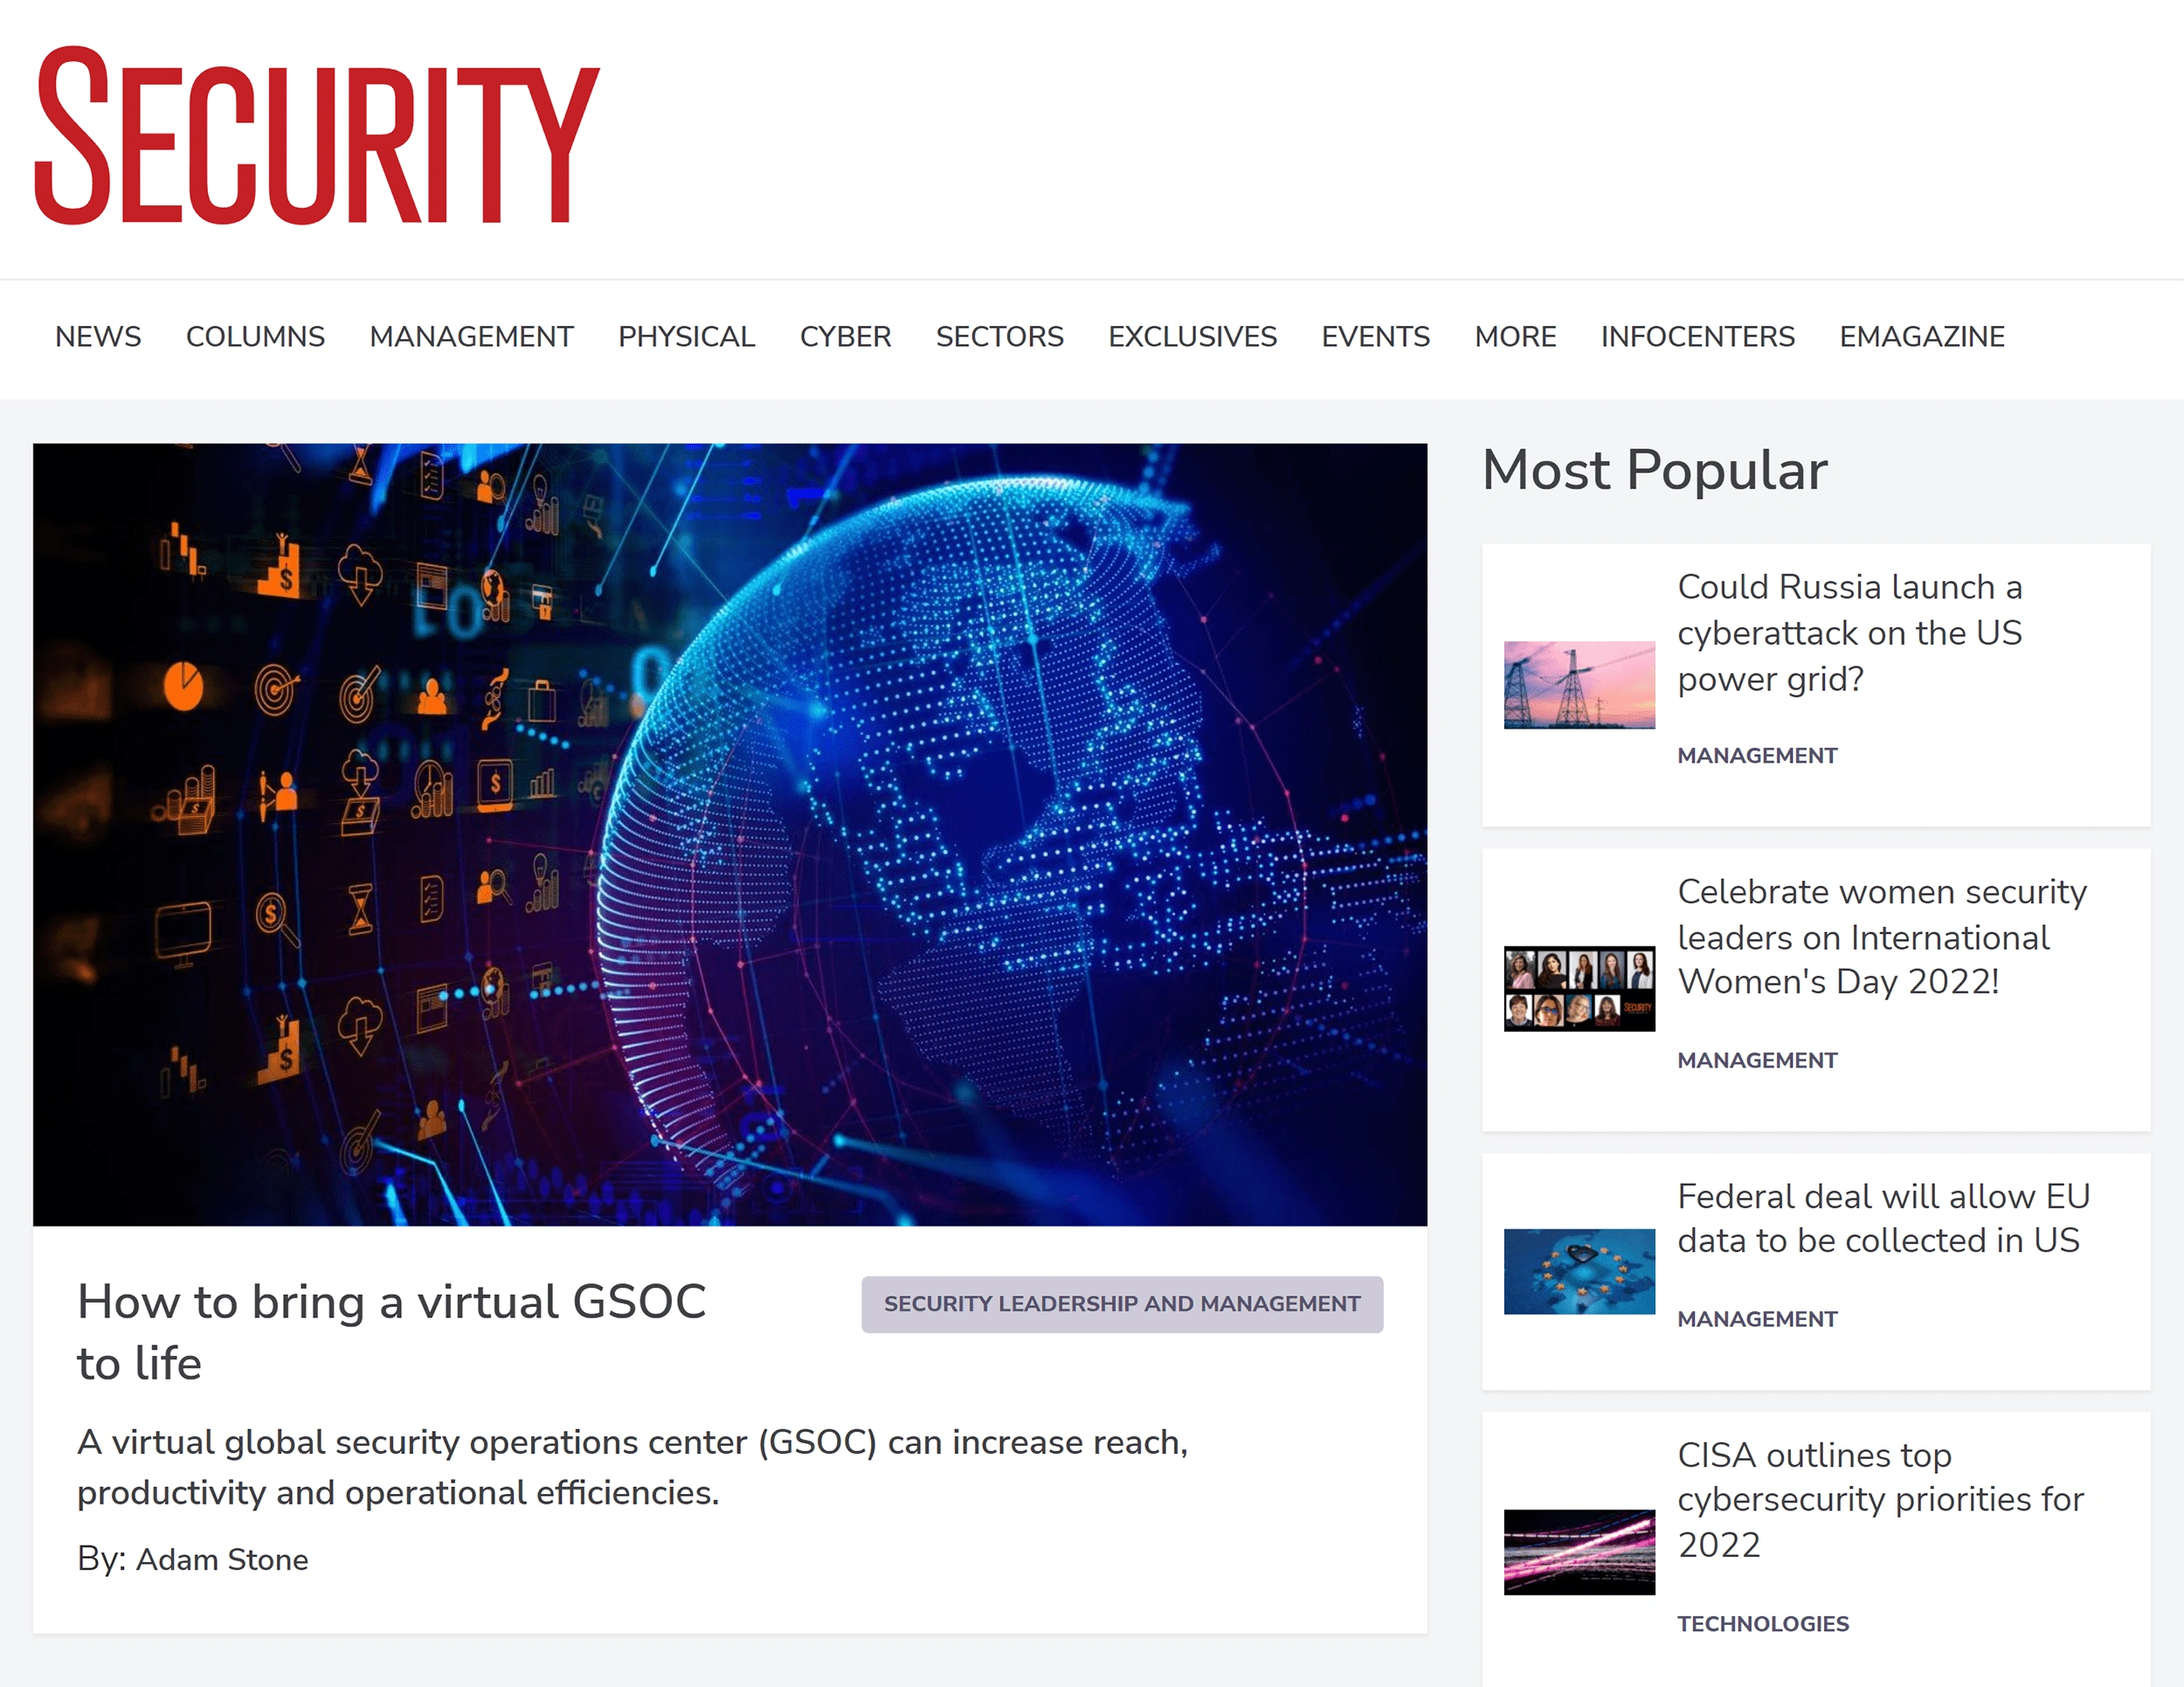 securitymagazine-min.png